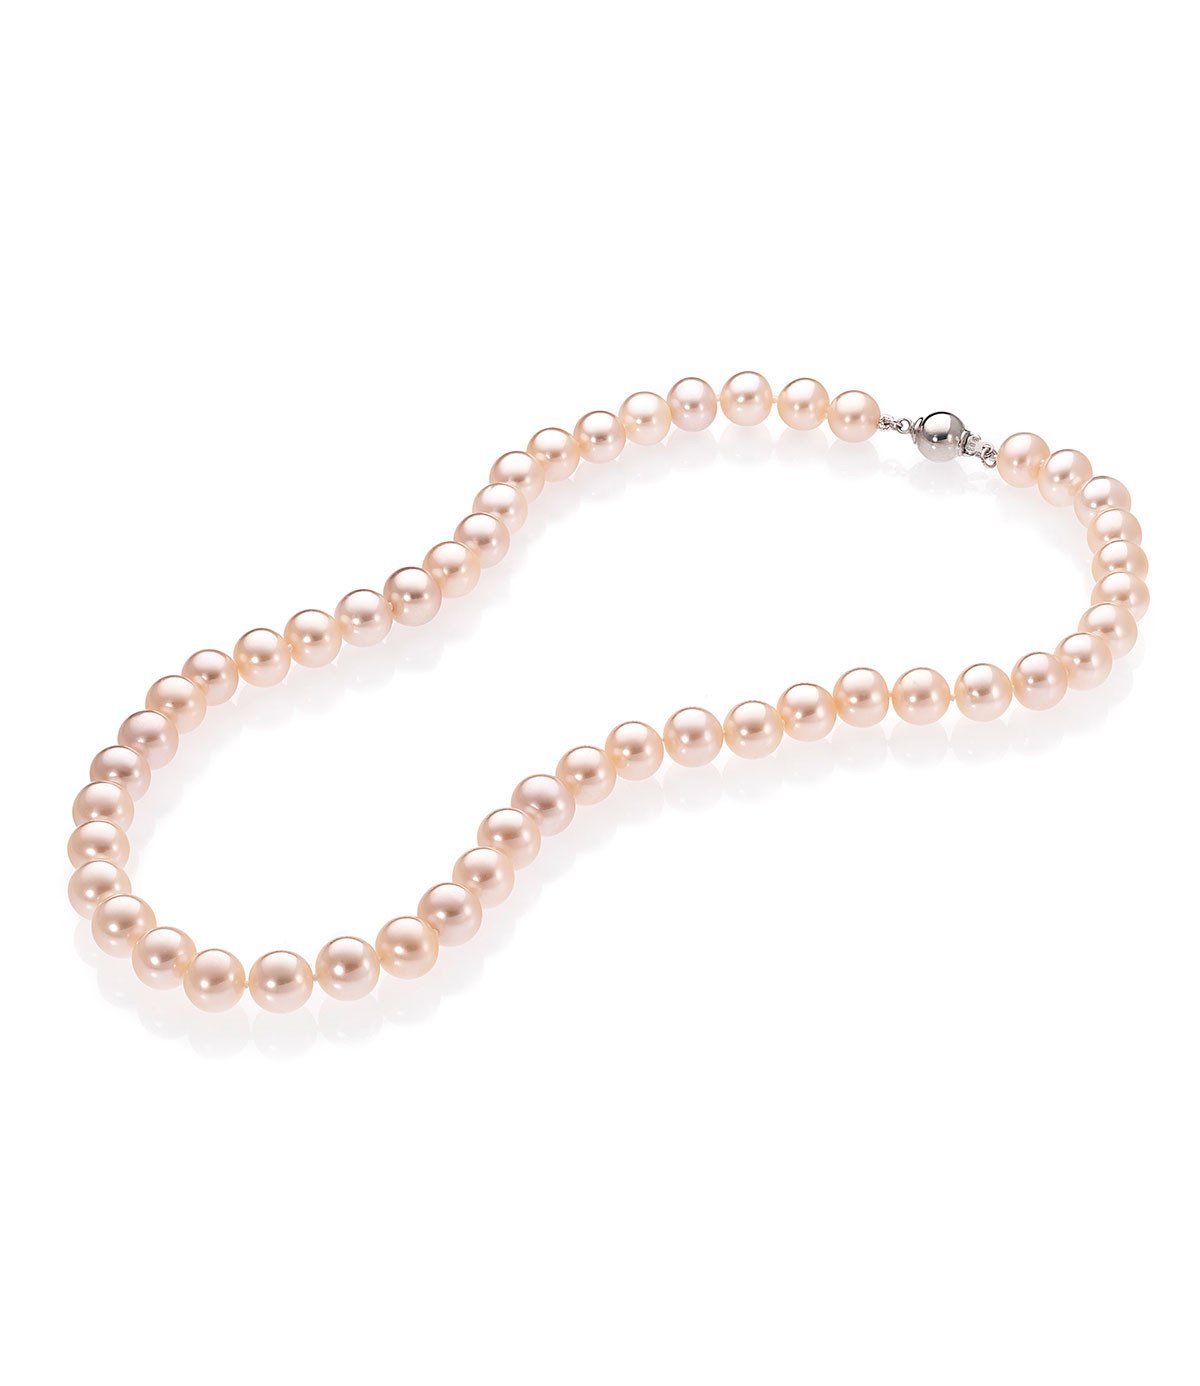 Freshwater Pearl Necklace Peach Sterling Silver Ball Clasp